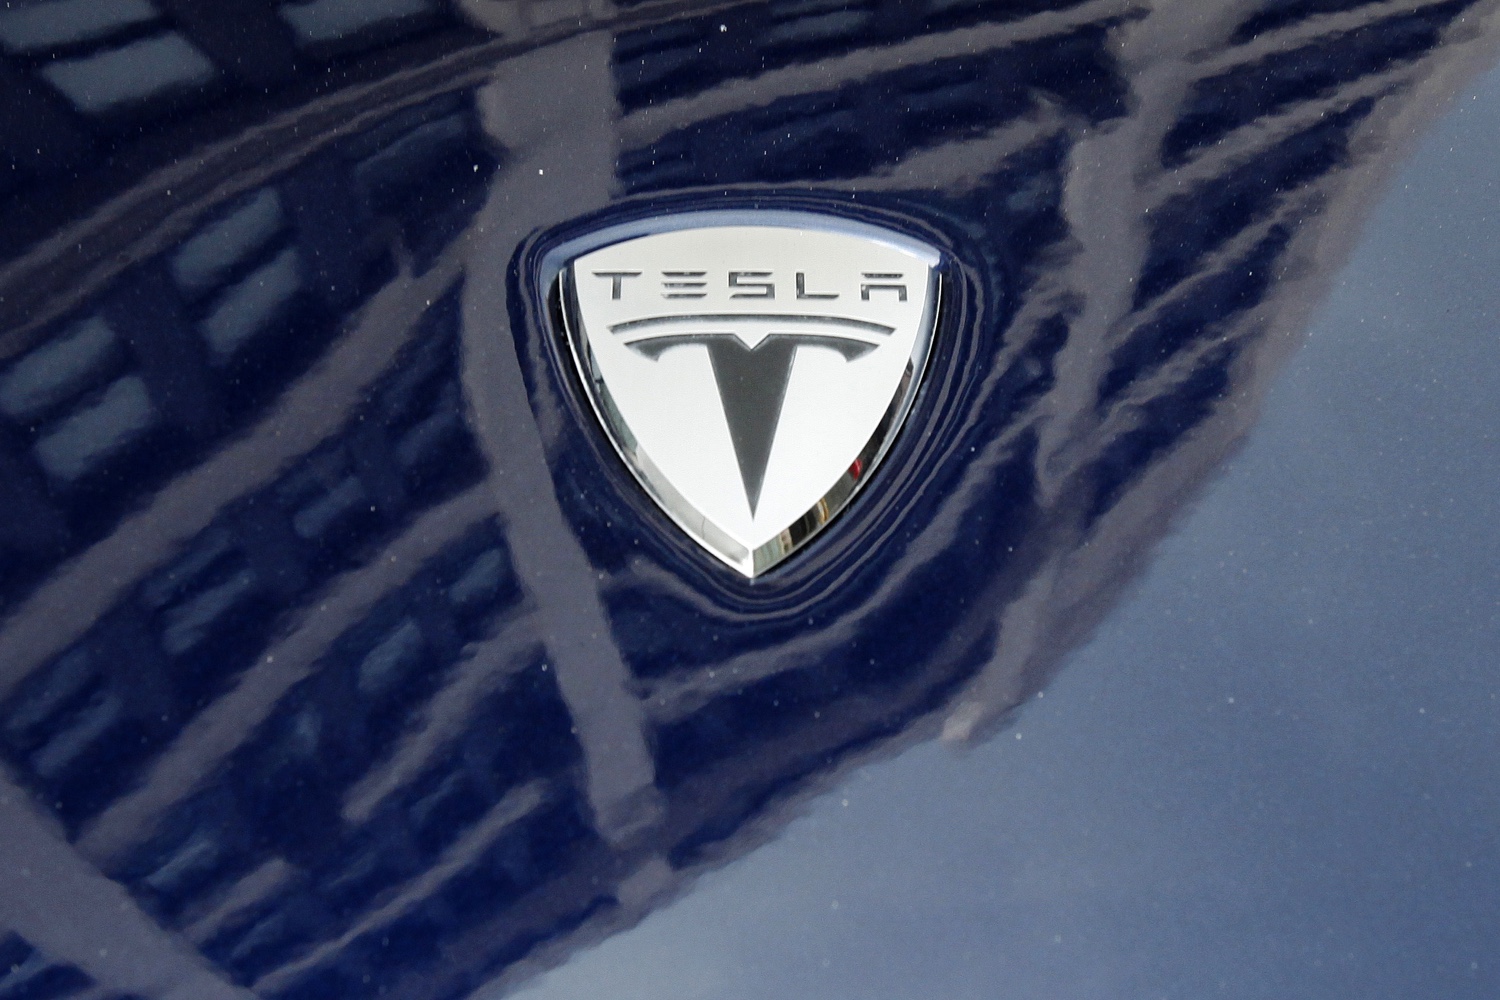 A logo of Tesla Motors on an electric car model is seen outside a showroom in New York on June 28, 2010. (Shannon Stapleton—Reuters)